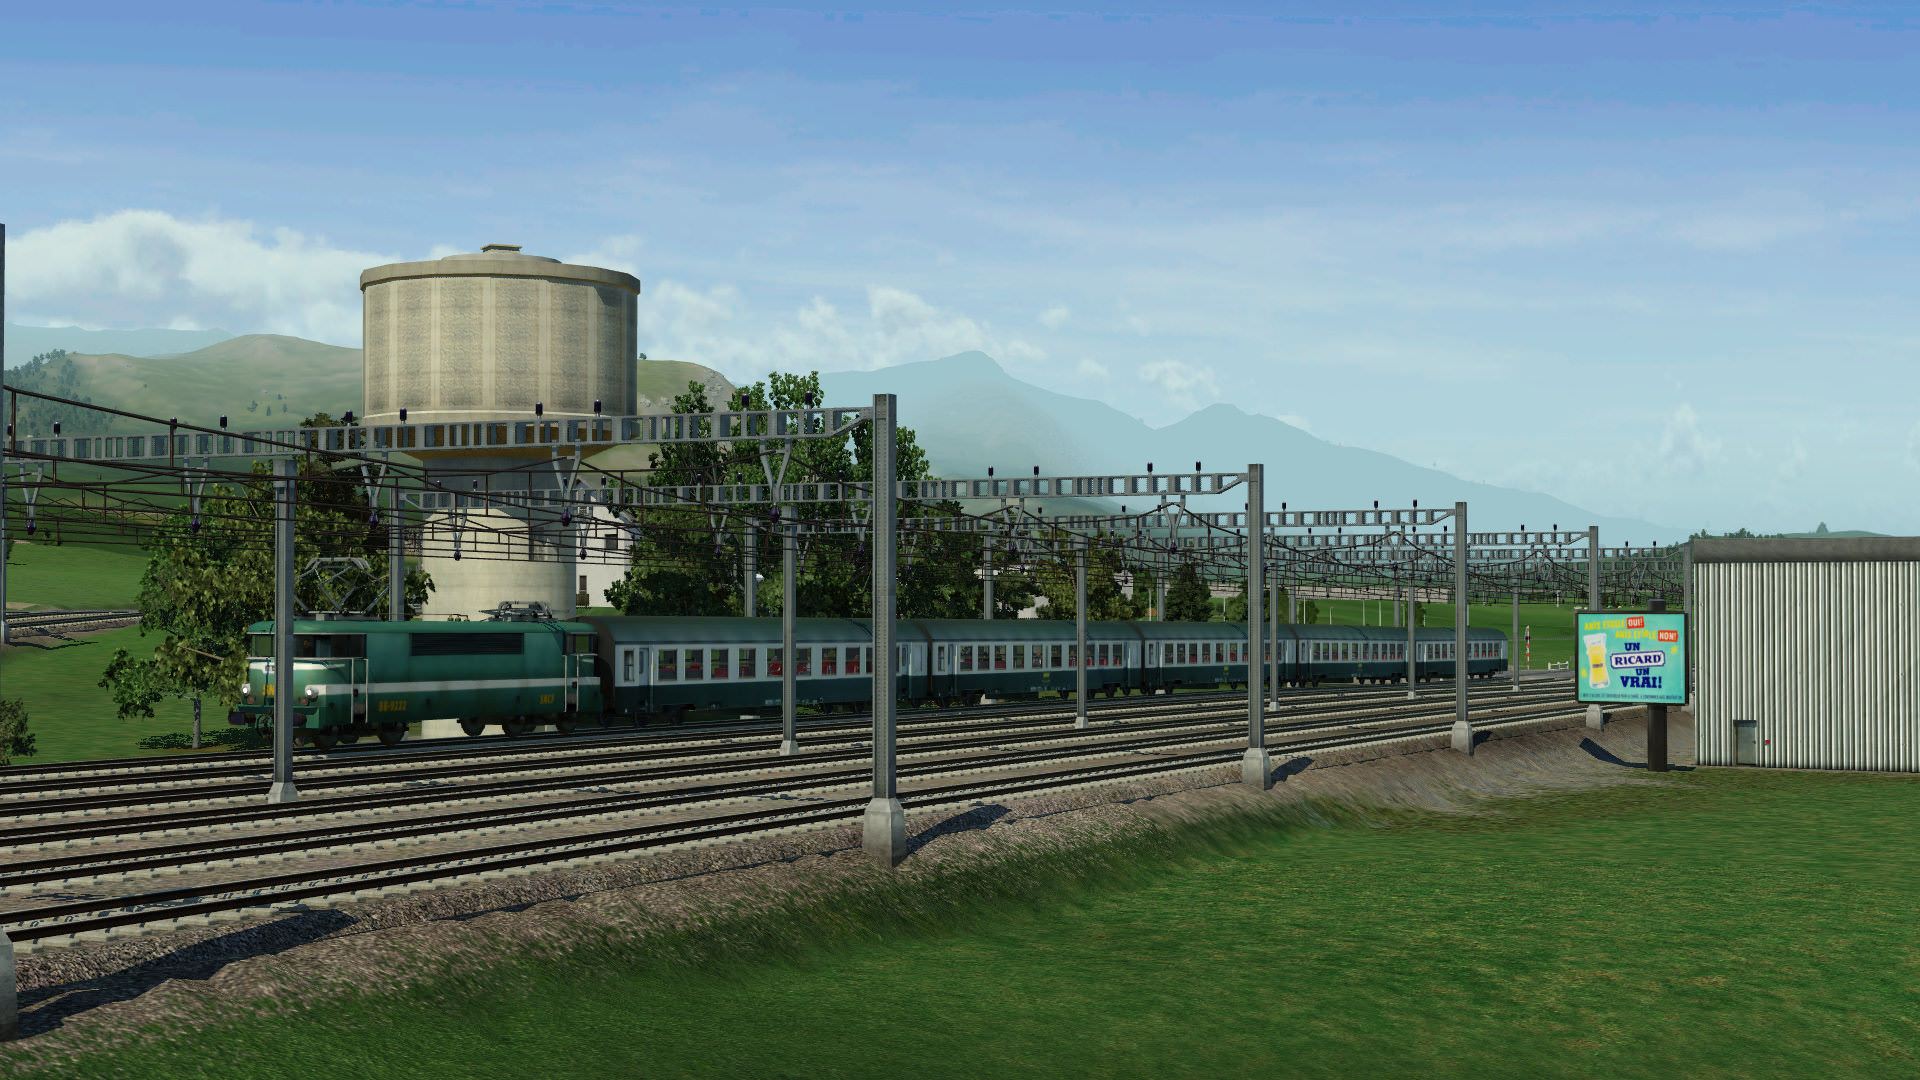 Panorama with BB 9200 "oullins" and USI wagons